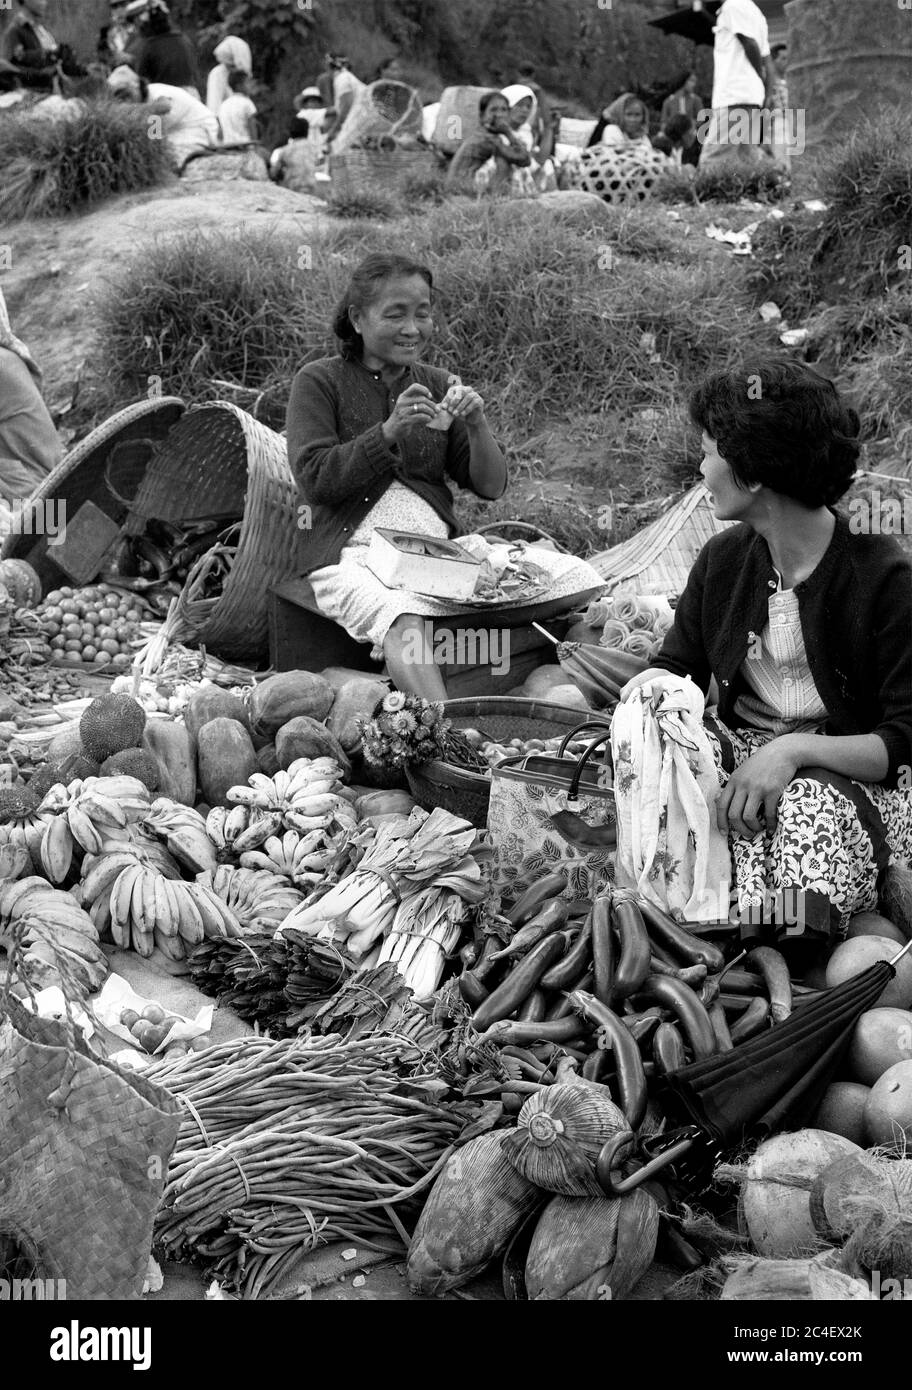 Roadside street market women selling fruit and vegetables in 1959, Baguio City, The Philippines Stock Photo